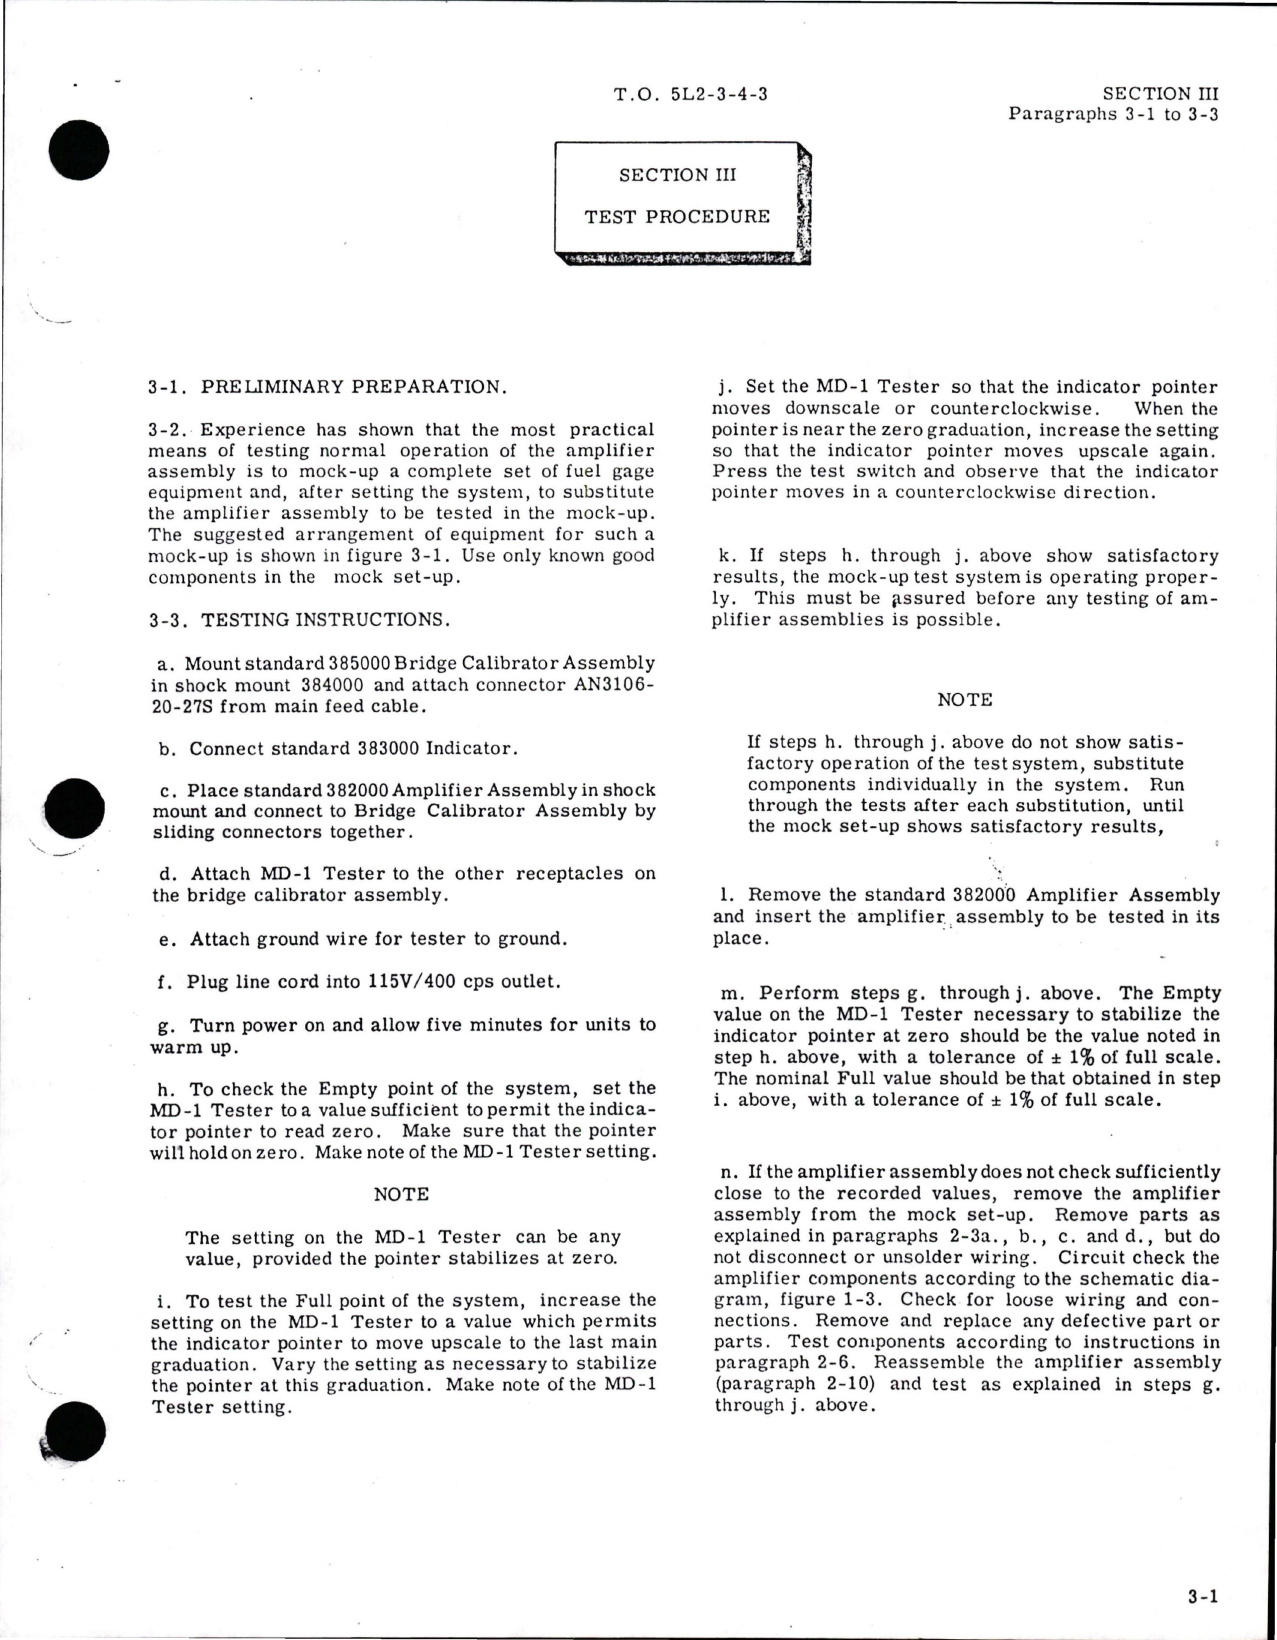 Sample page 7 from AirCorps Library document: Overhaul for Capacitor Fuel Gage System Amplifier Assemblies - Parts 382000 and 382000-1